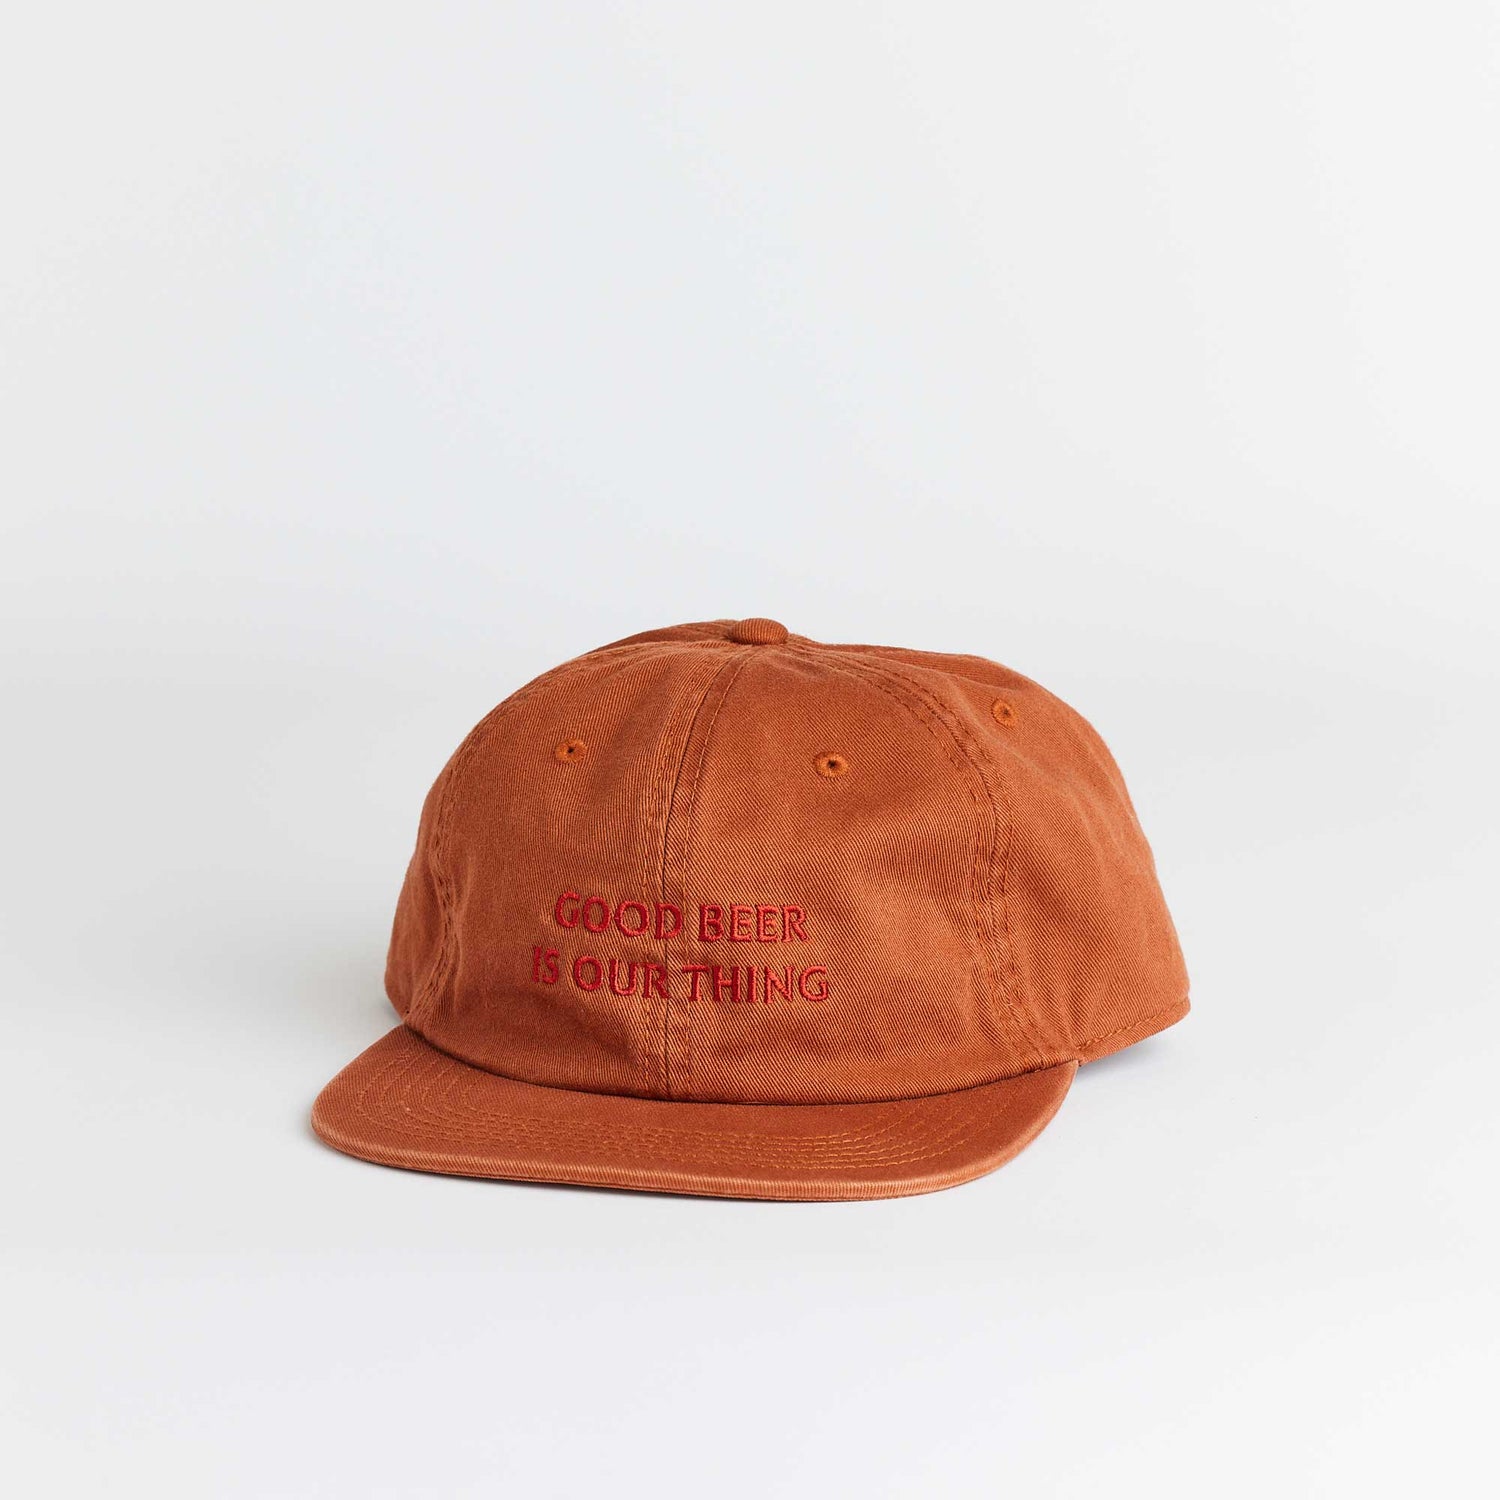 Good Beer Is Our Thing Cap in Copper colour